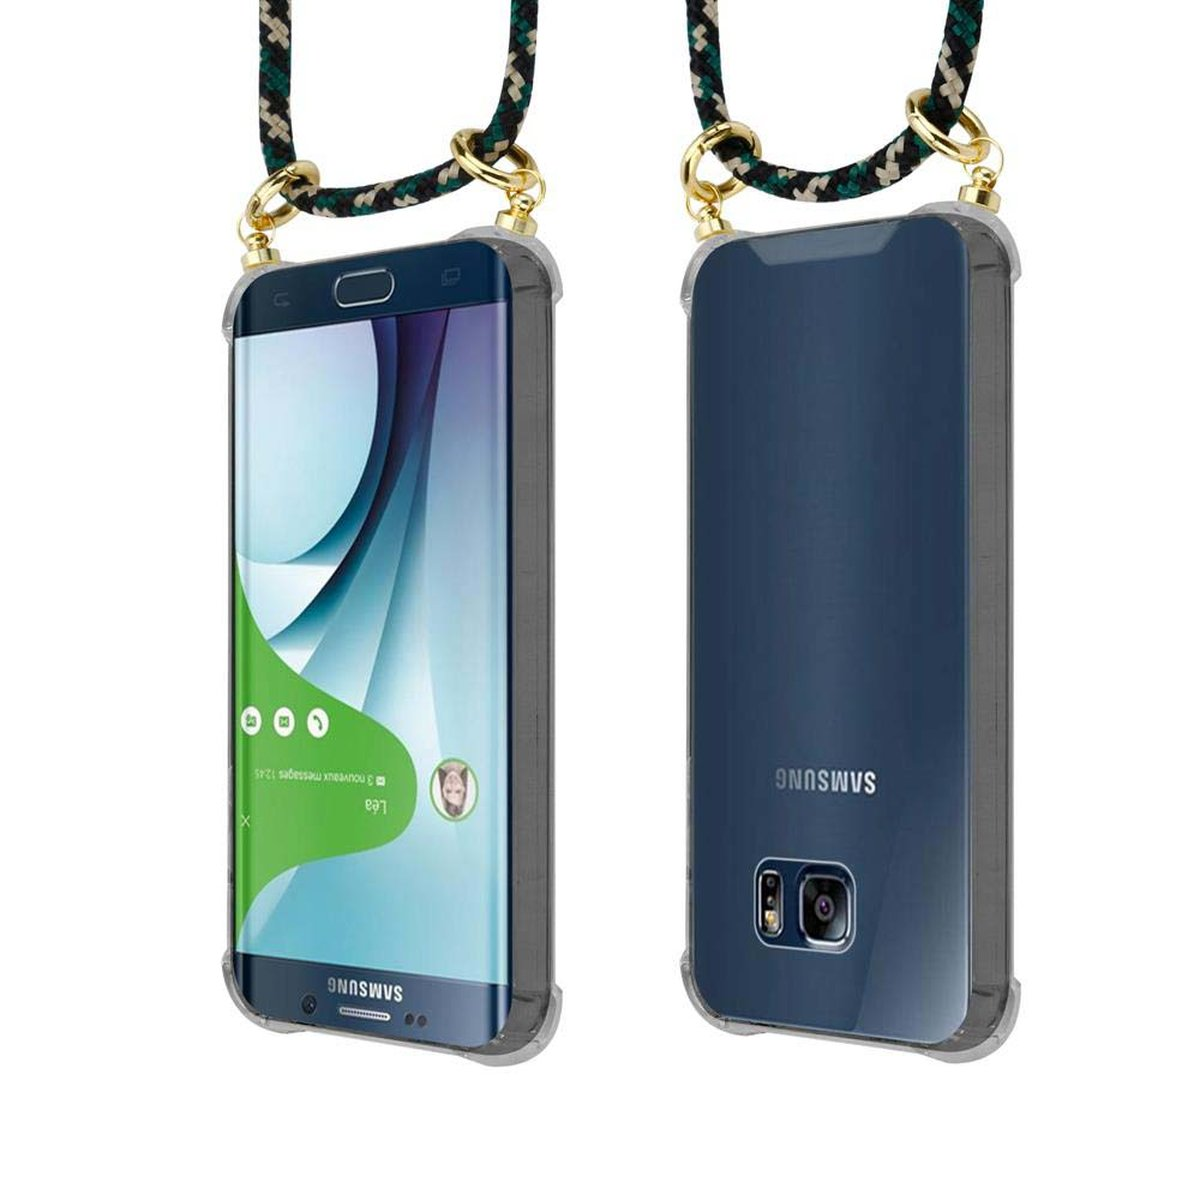 Kordel Handy CAMOUFLAGE Samsung, EDGE, CADORABO Backcover, Ringen, und Kette Gold S6 Hülle, Band mit abnehmbarer Galaxy